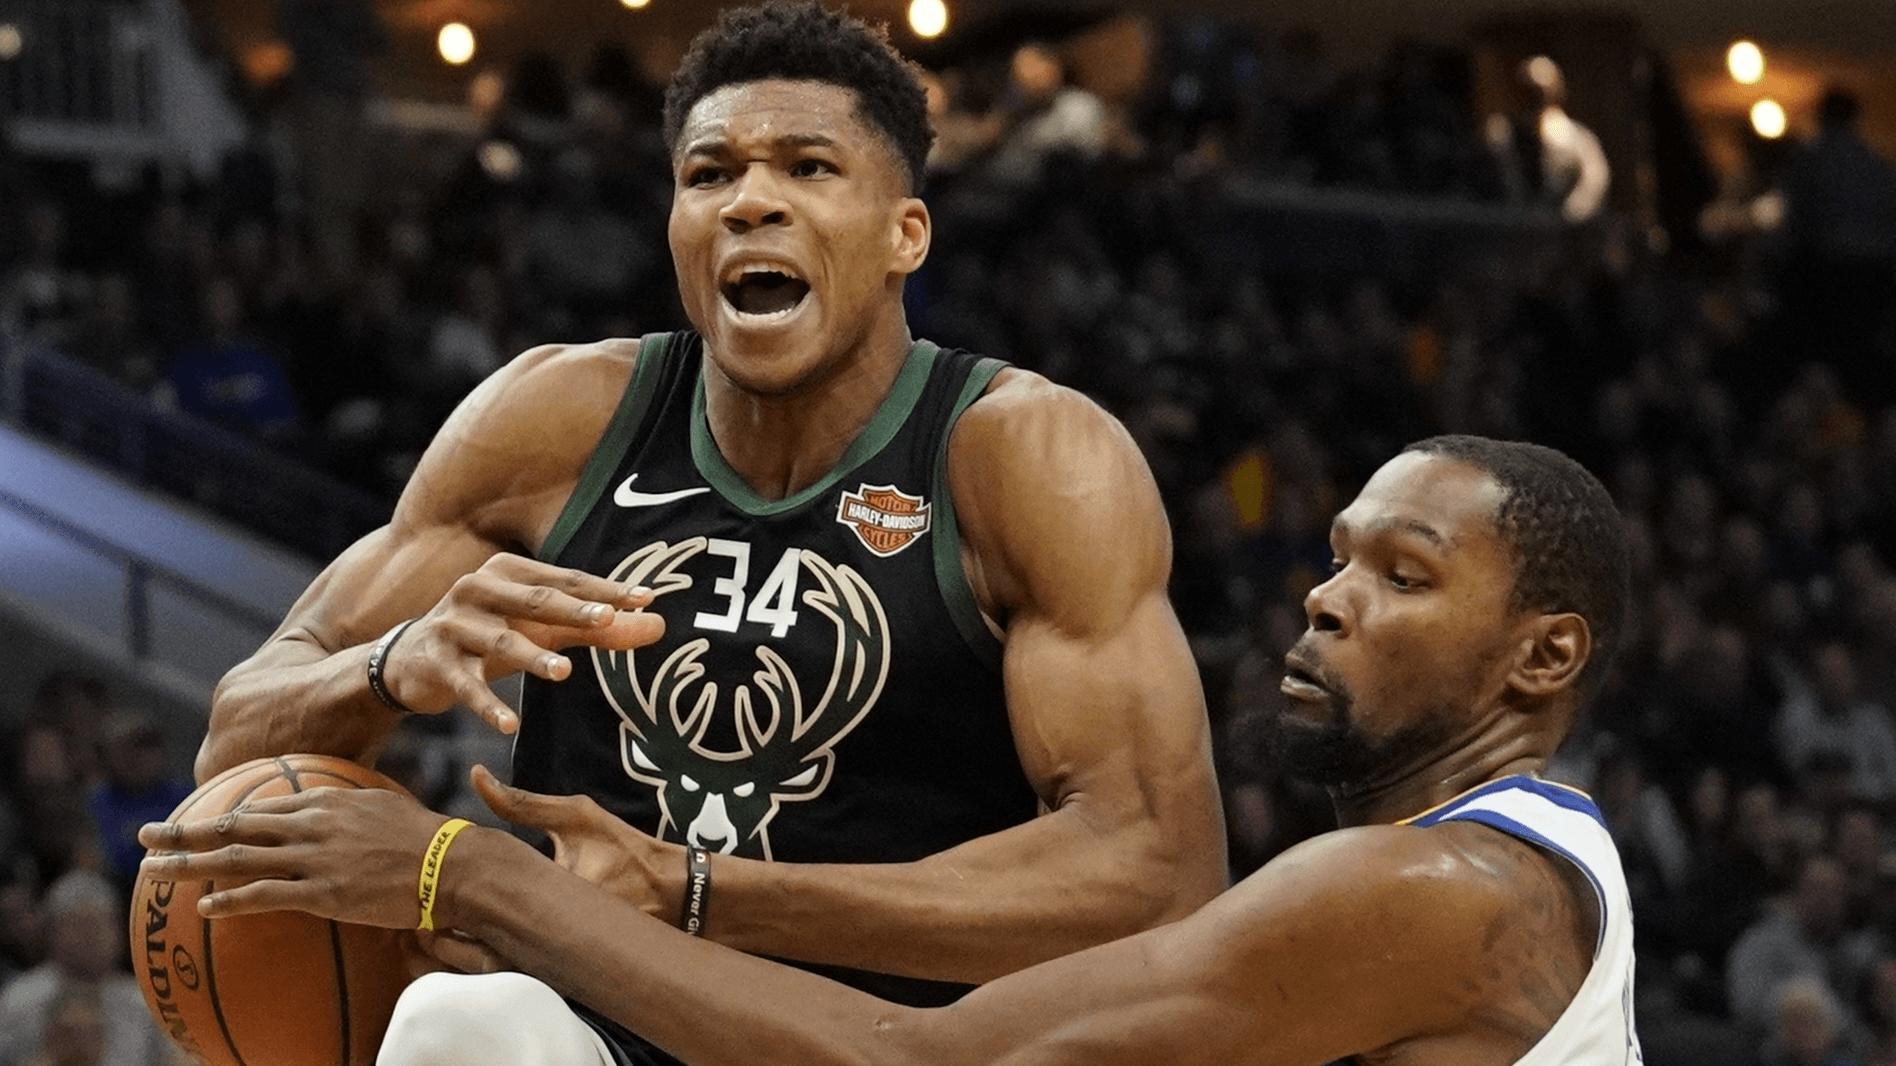 Nets vs Bucks Game 6 Betting Preview: Can the Bucks Stay Undefeated at Home to Take the Series to Seven?